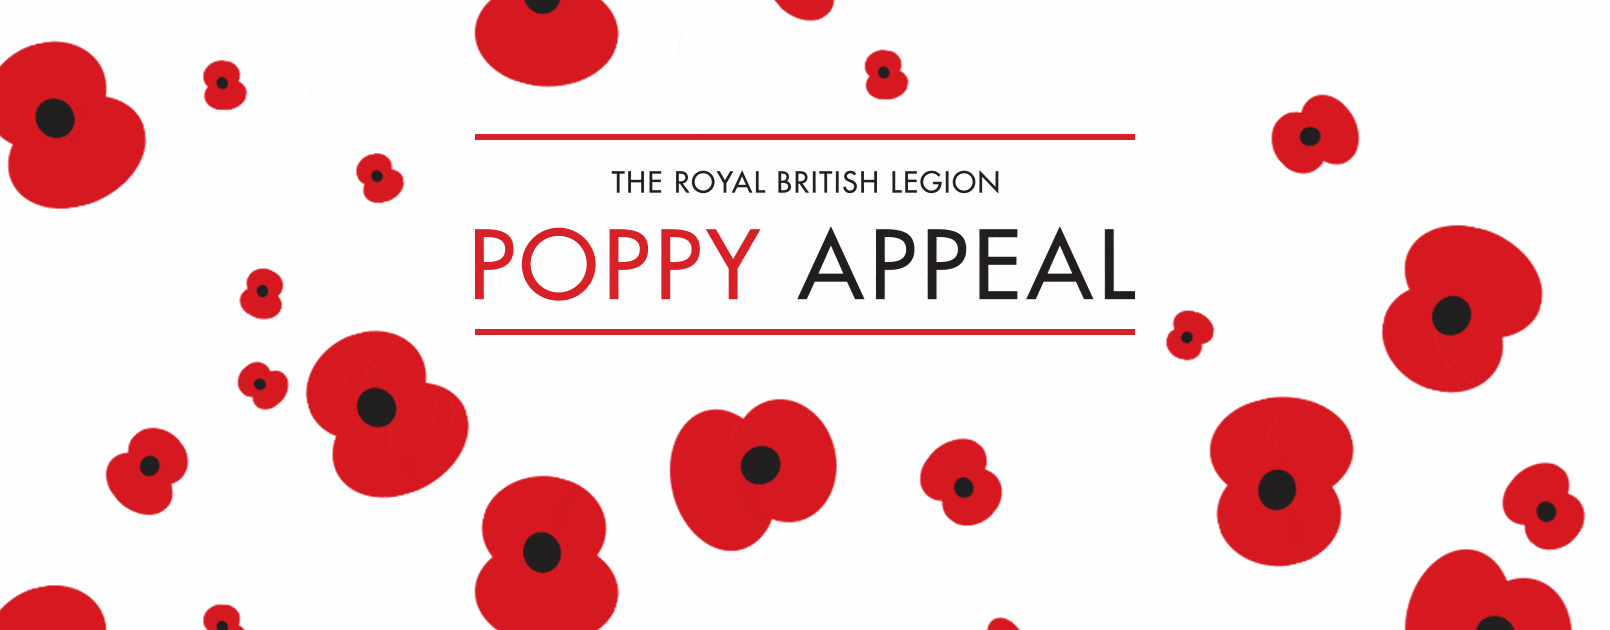 The Poppy appeal is a big part of yearly remembrance week. During the remembrance period, the members of the royal family wear a red poppy. 